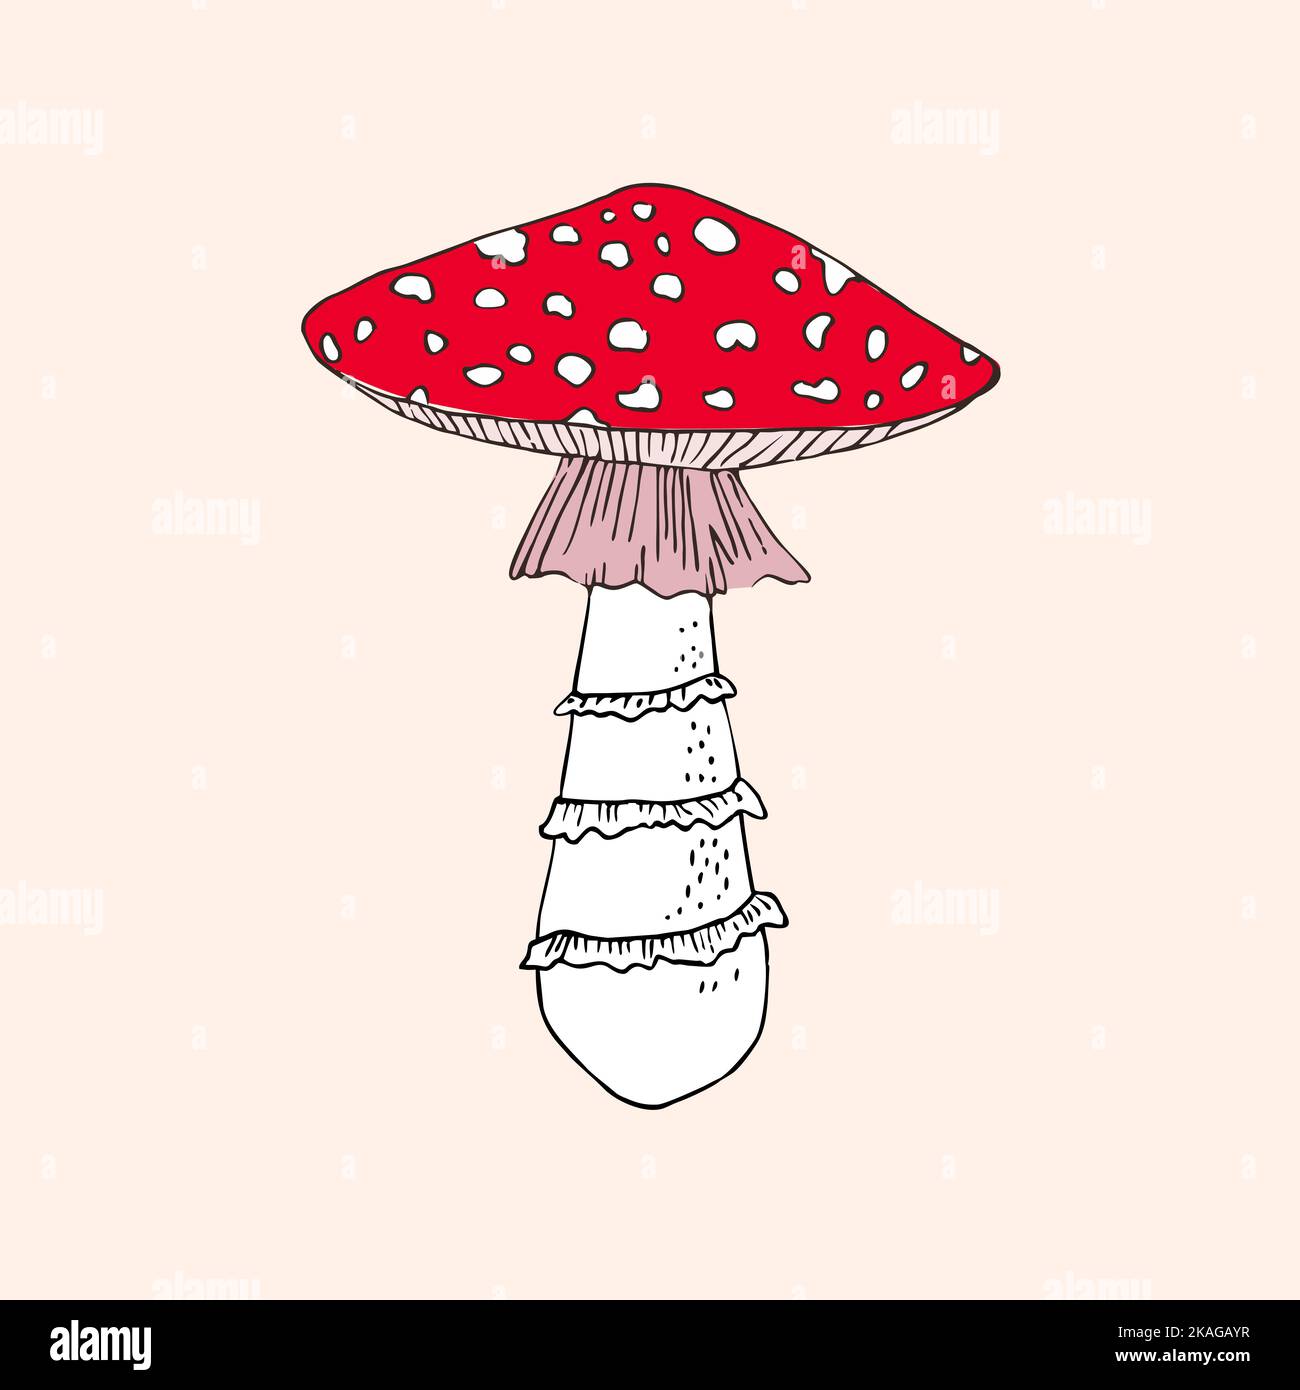 Red cup fly agaric hand drawn vector illustration. Stock Vector